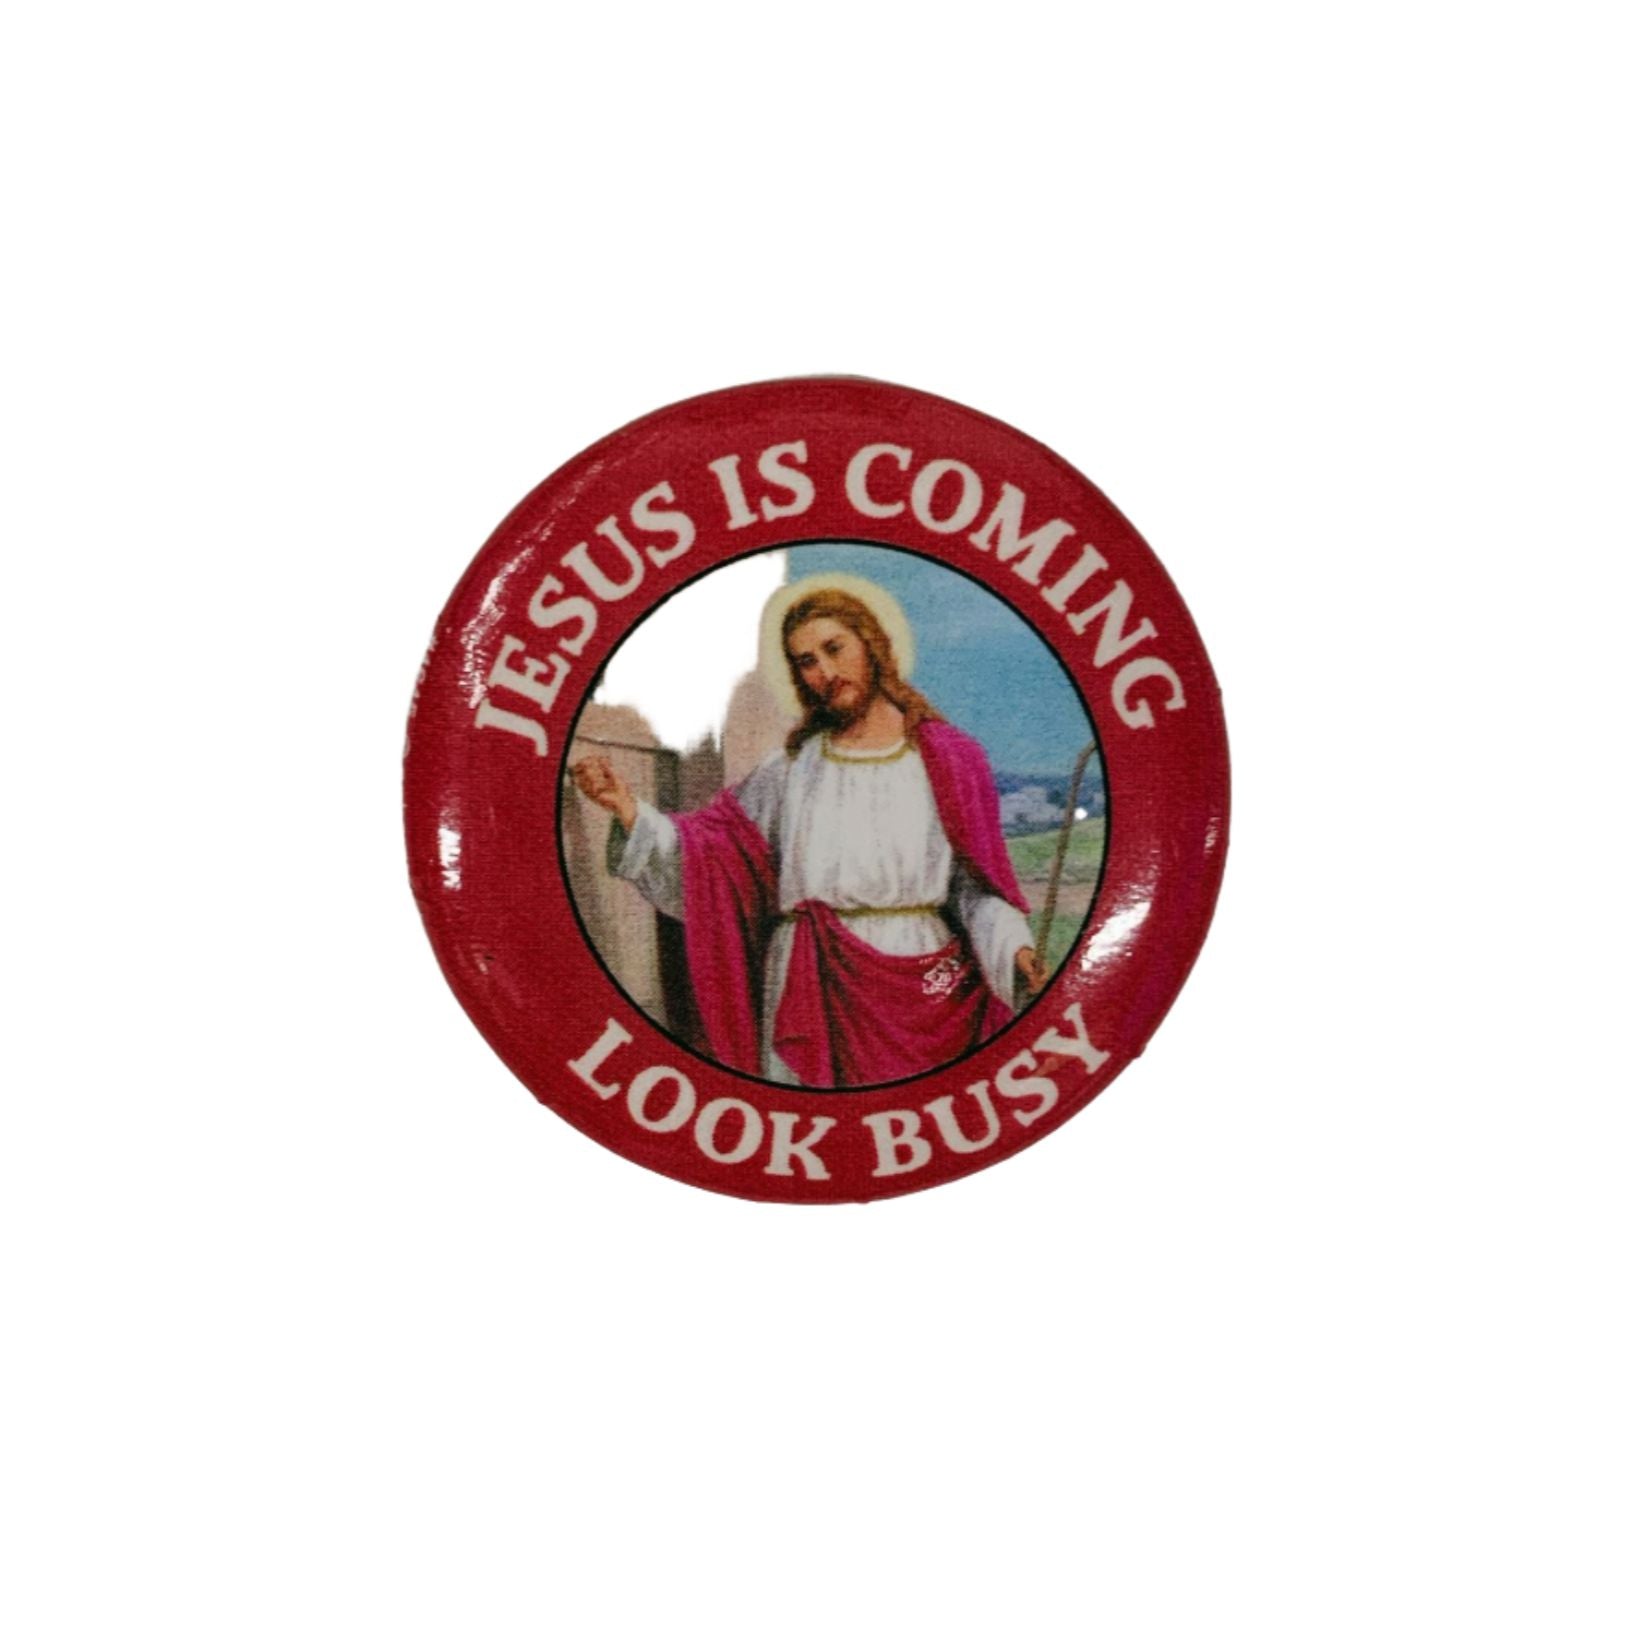 Jesus Is Coming. Look Busy Lapel Pin Button | Pinback Button Badge | 1.3"